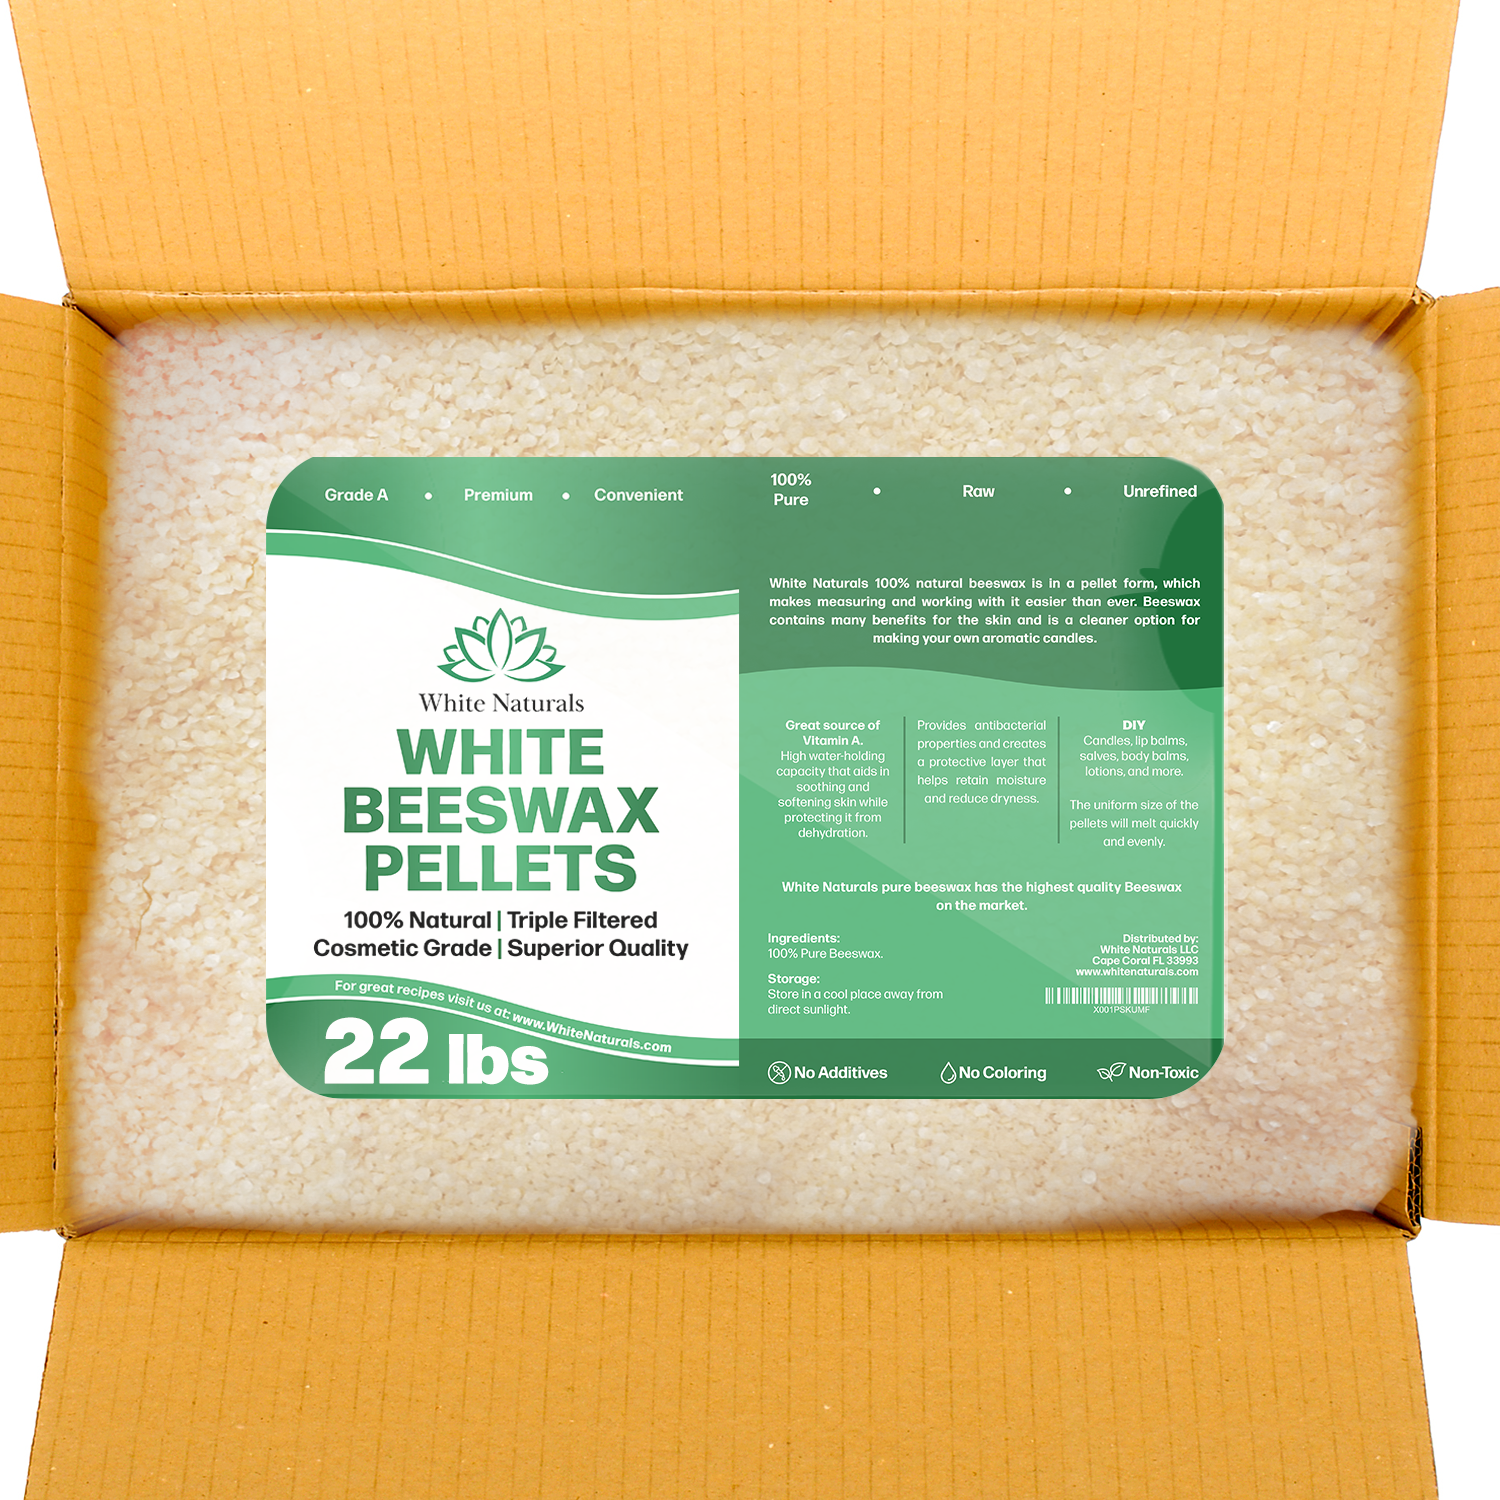 Bulk White Beeswax Pellets 22 lb , Pure, Organic, Cosmetic Grade, Triple  Filtered, Great For Diy Lip Balms, Lotions, Candles & more - White Naturals